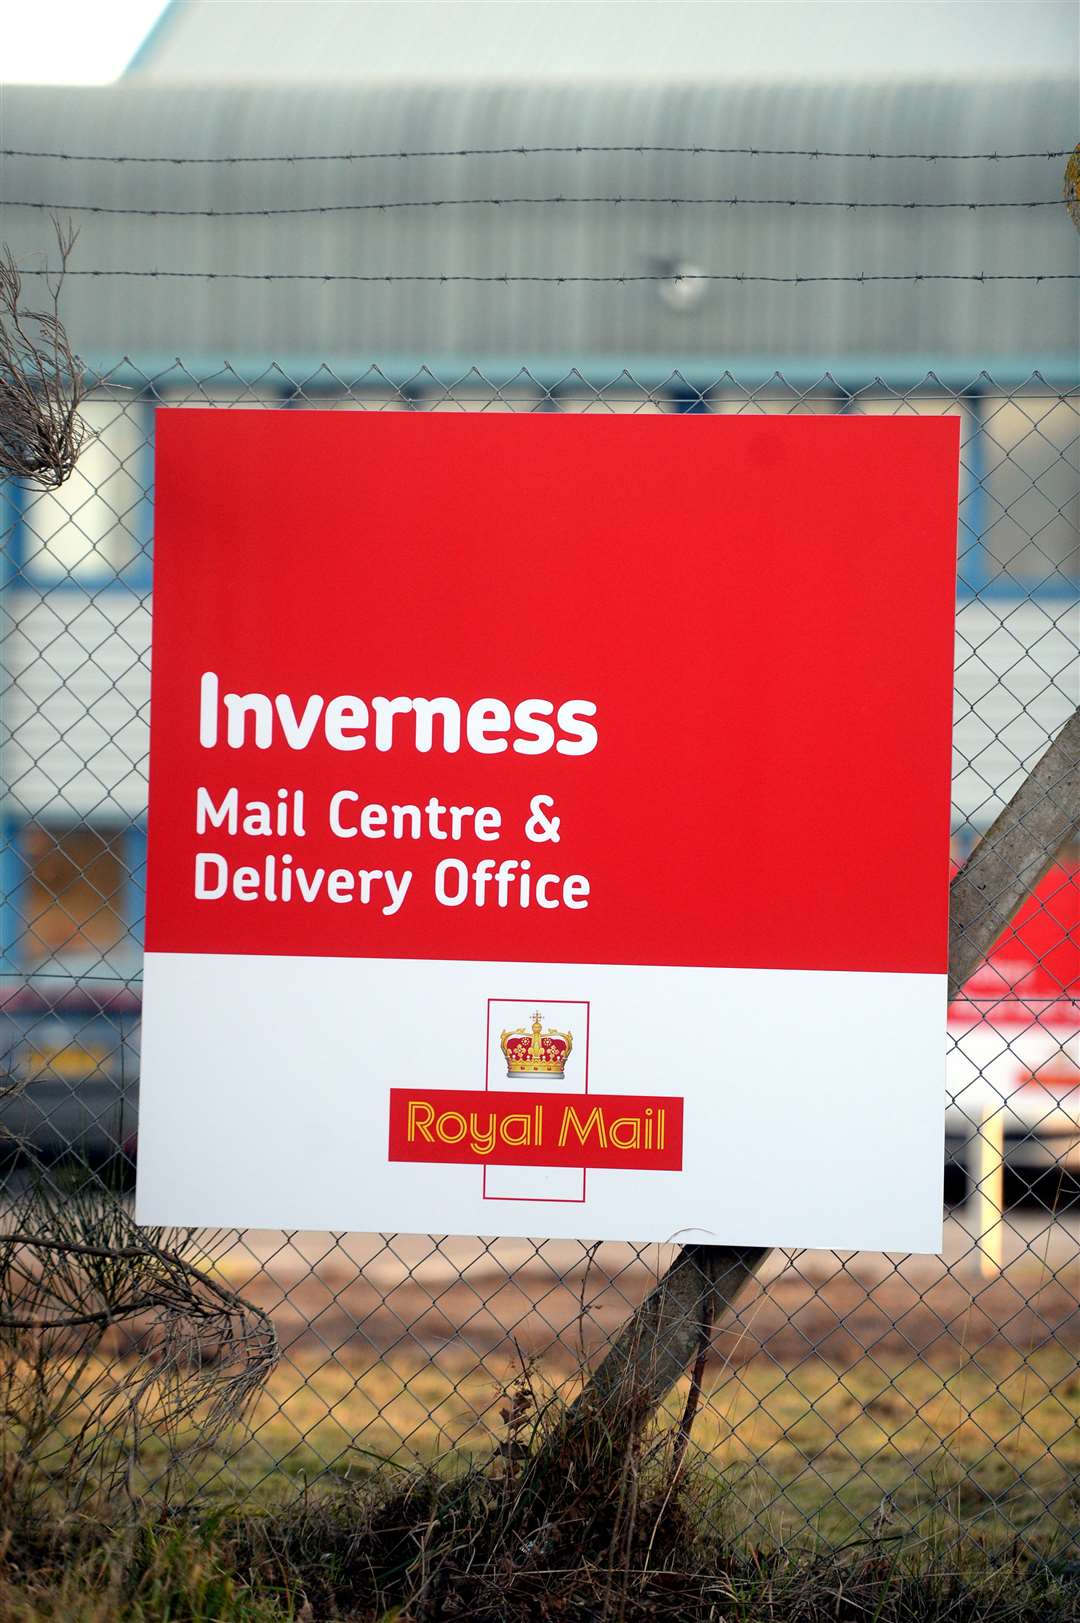 A mail strike in Inverness could hit deliveries across the Highlands and Islands.